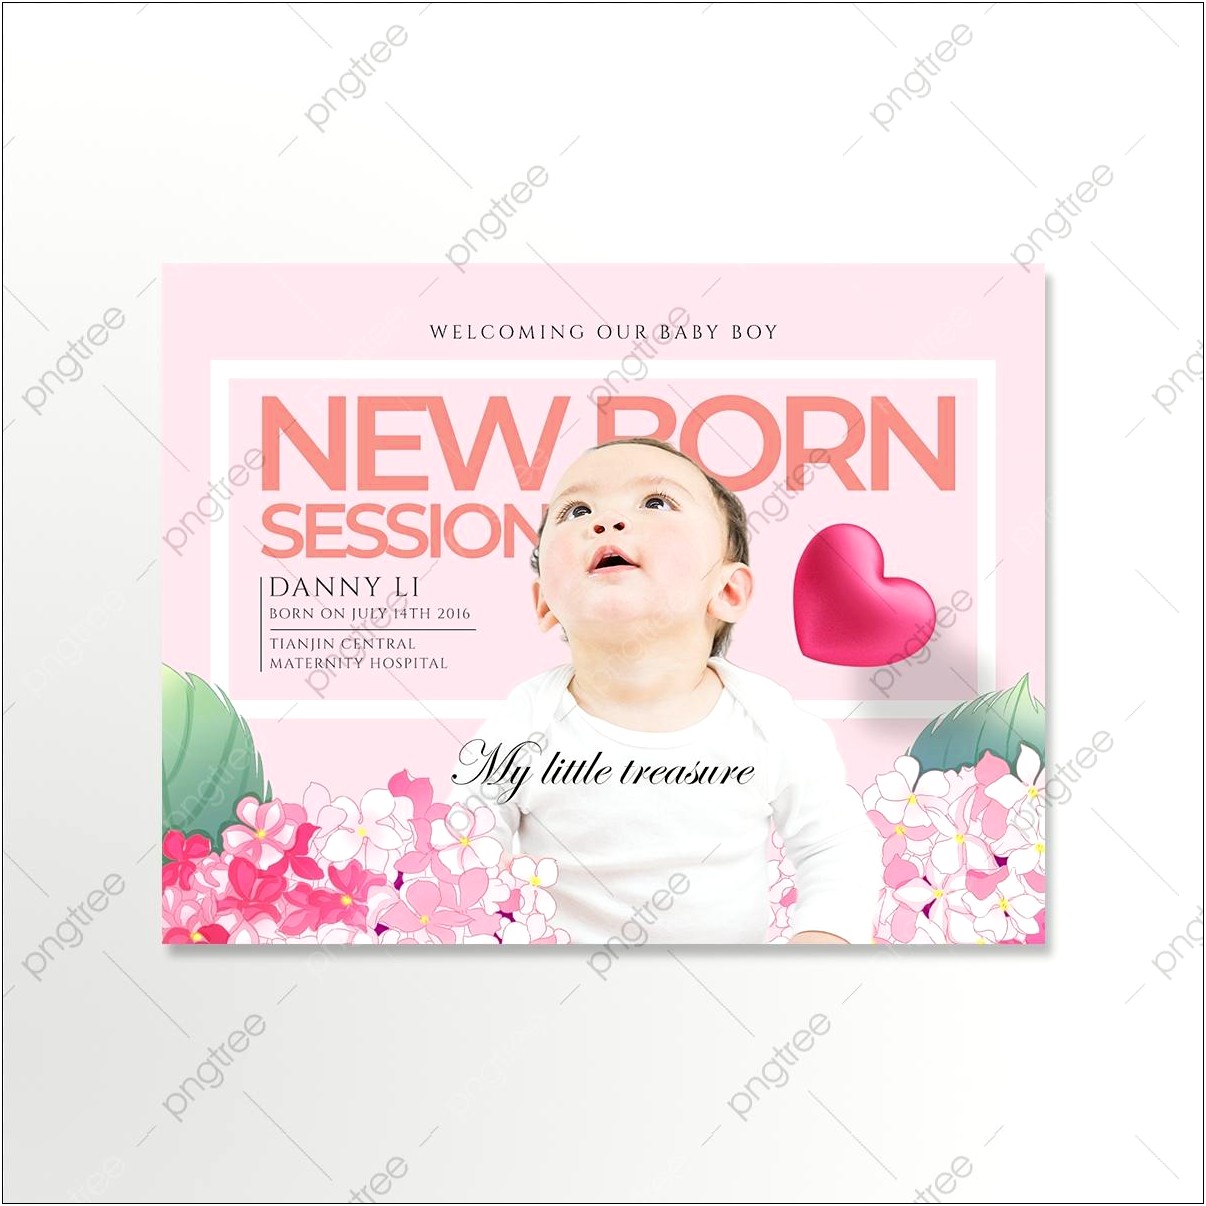 Free Online Cards Template For Baby Birth